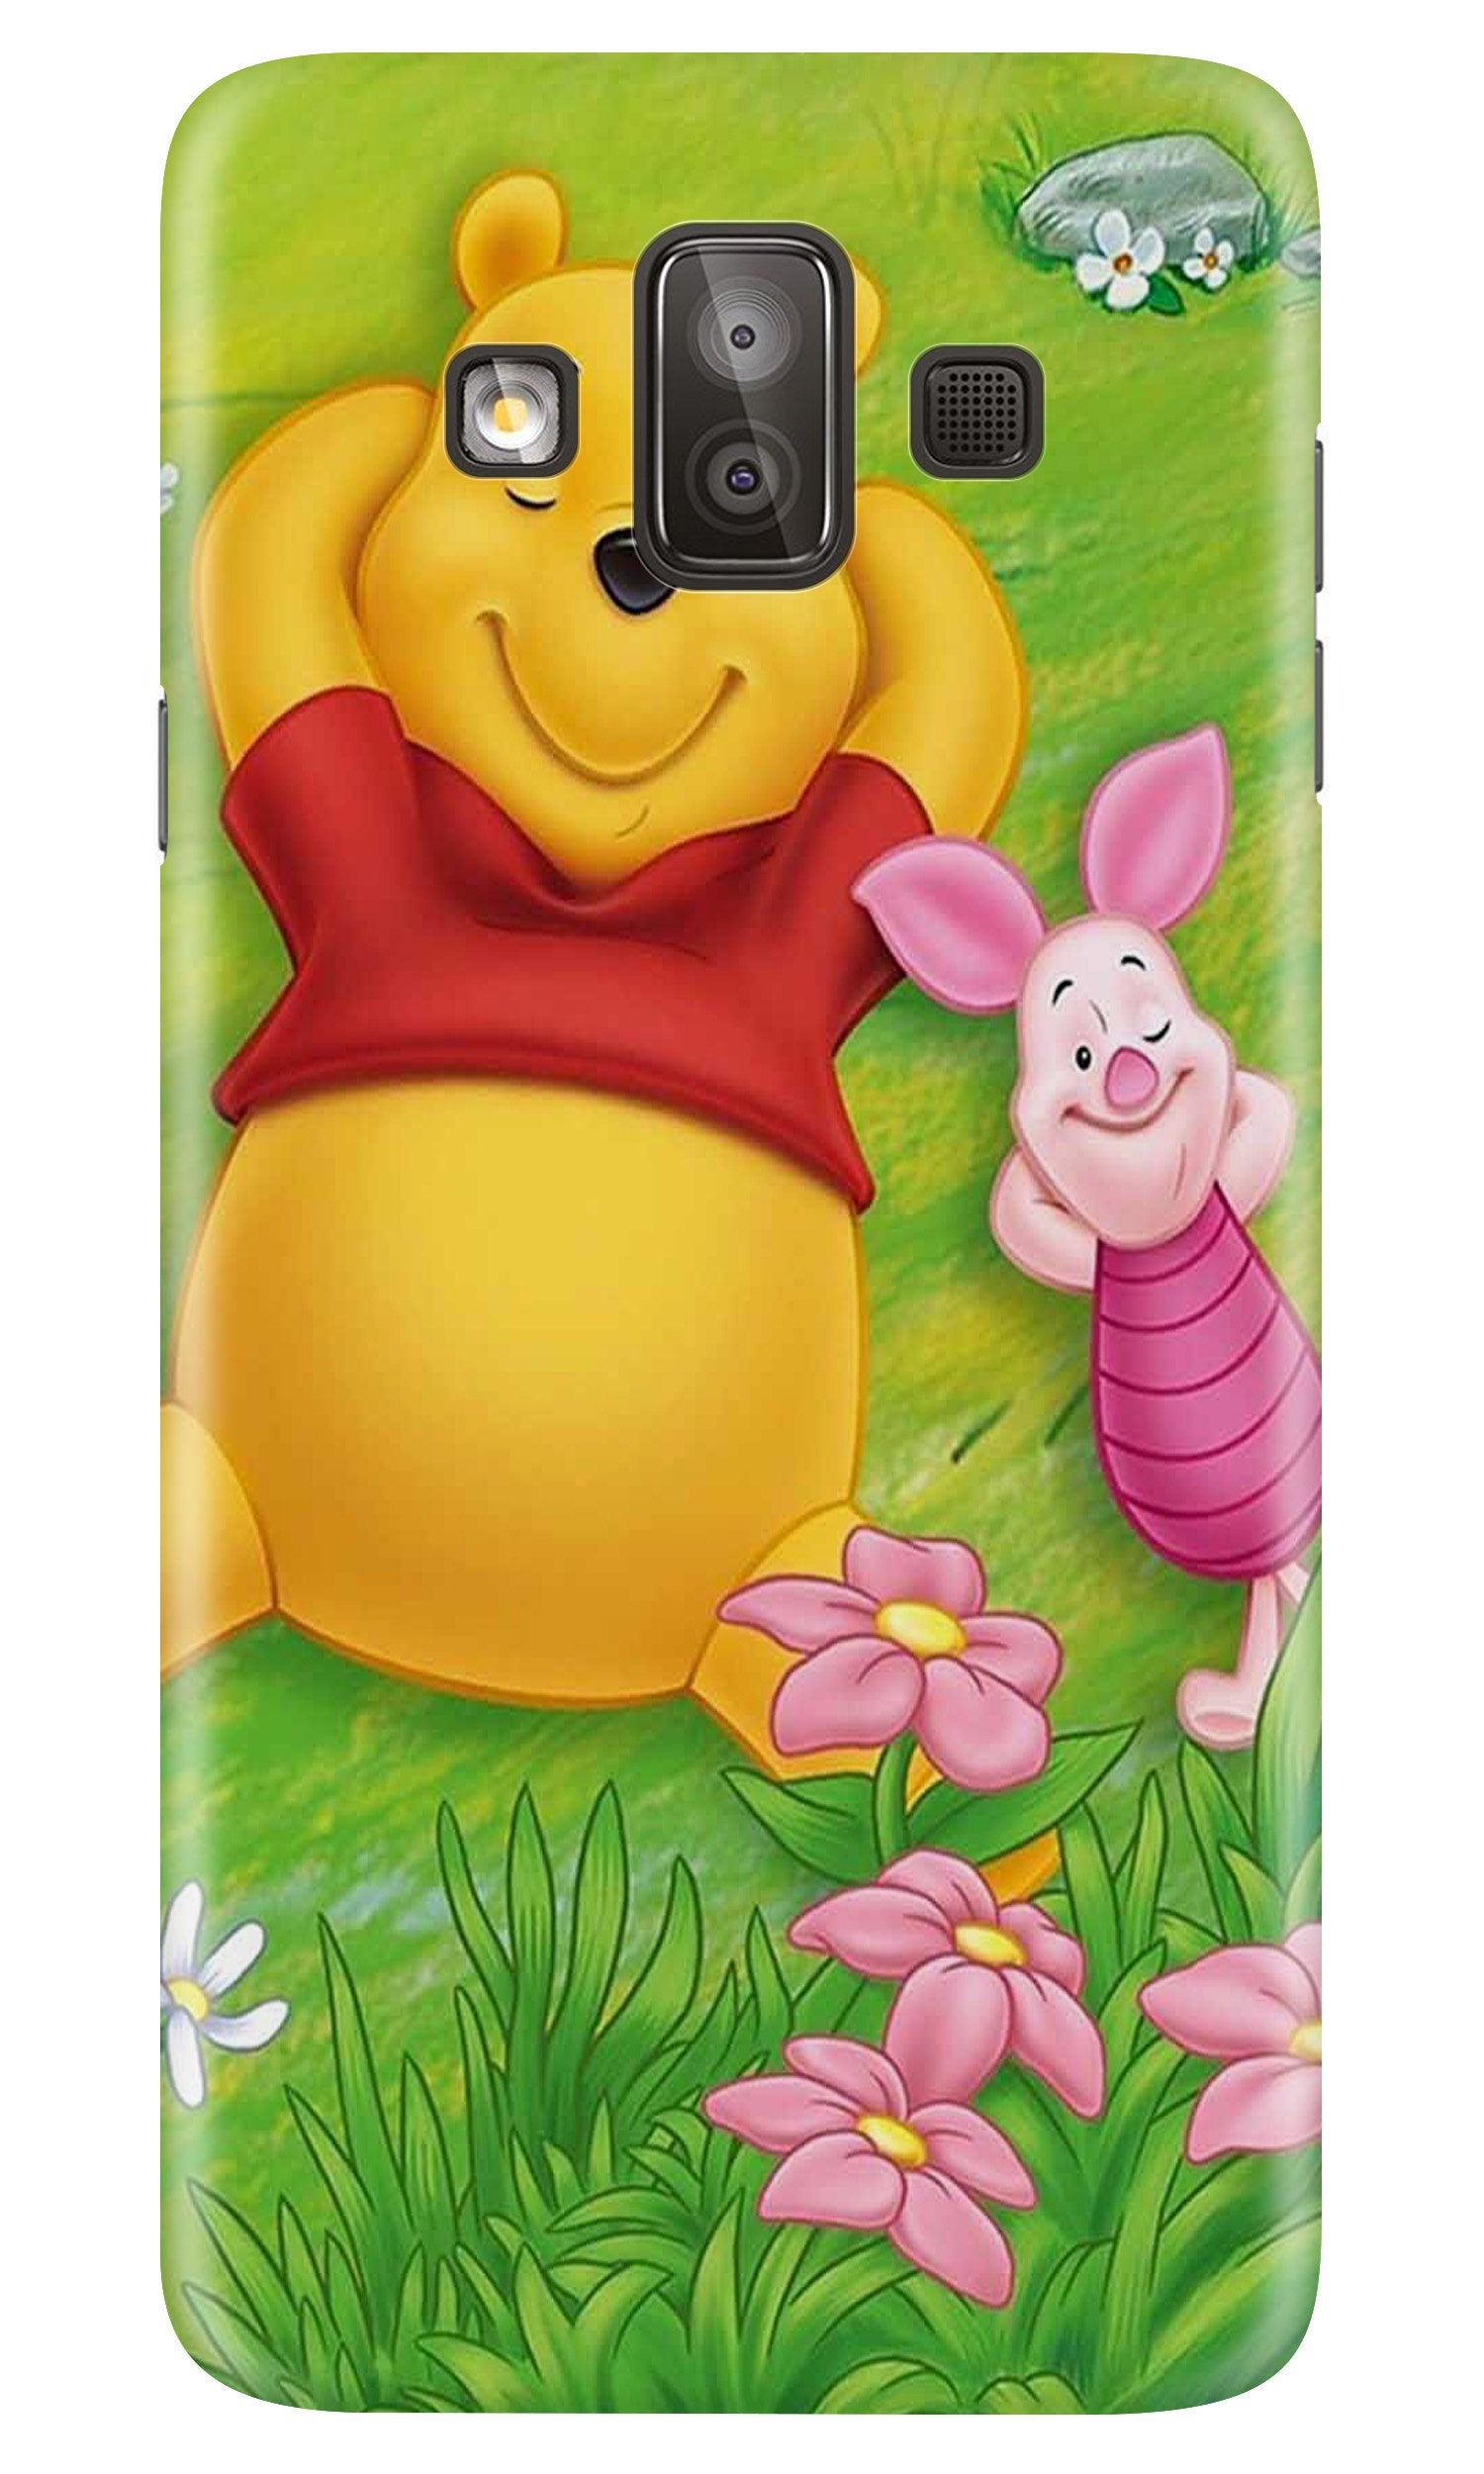 Winnie The Pooh Mobile Back Case for Galaxy J7 Duo (Design - 348)